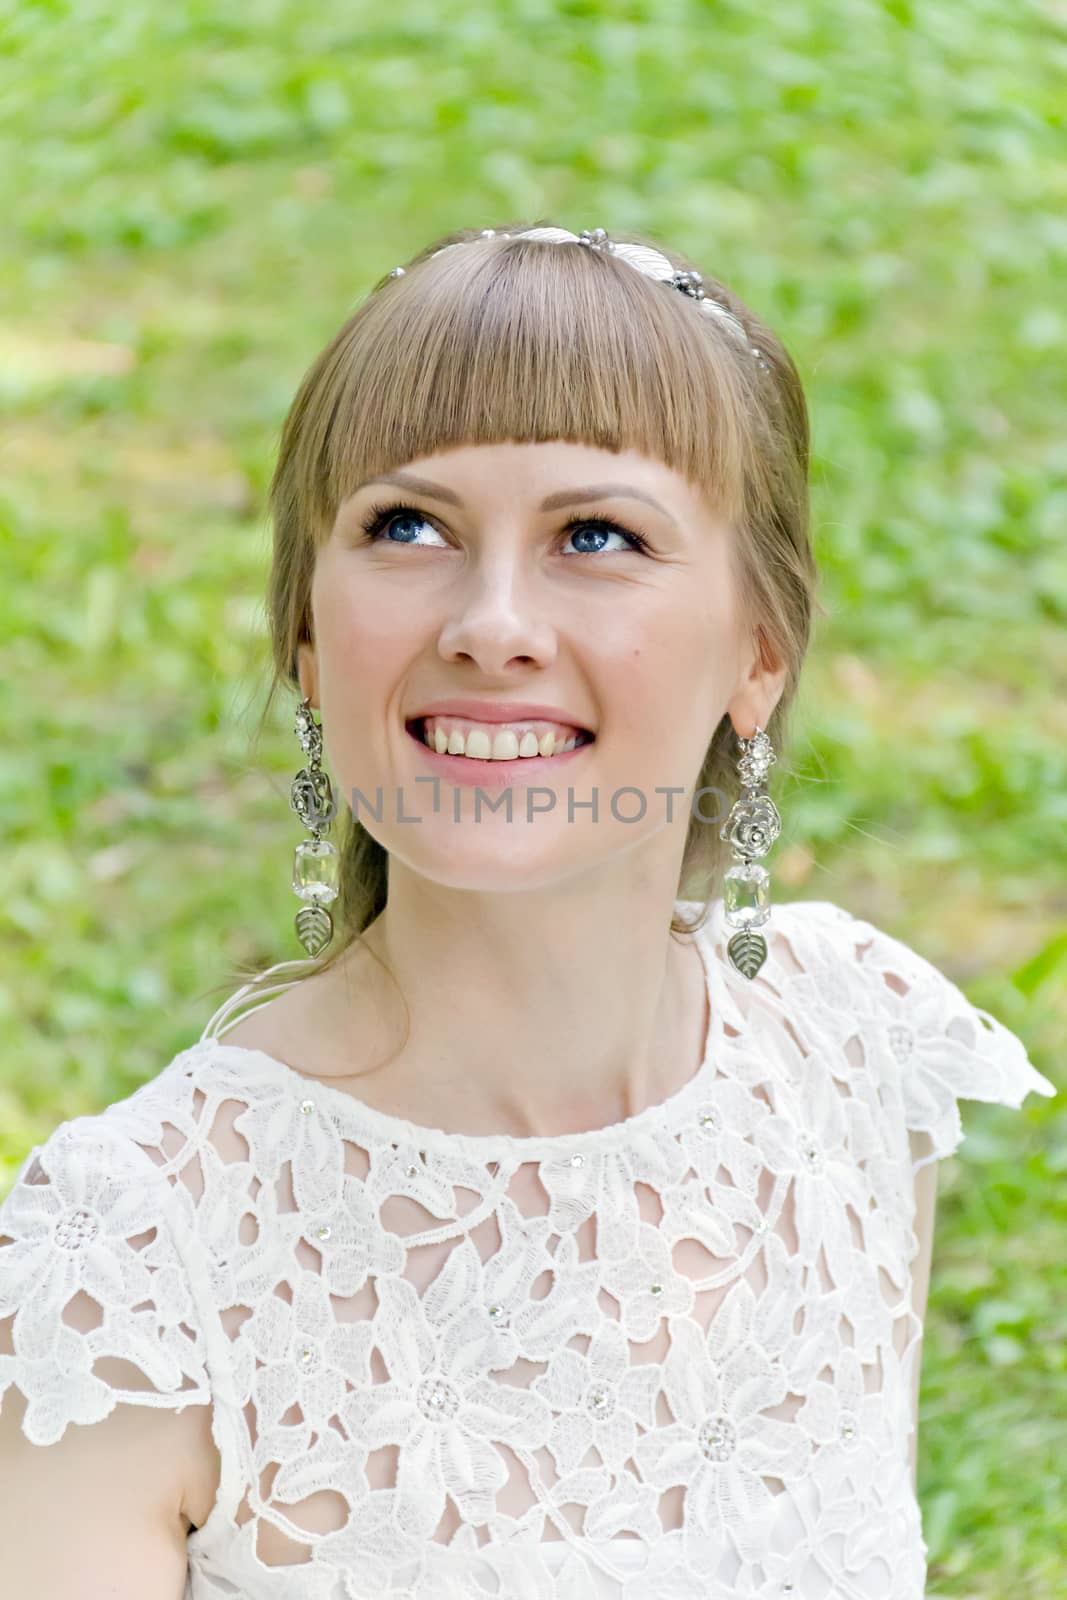 Portrait of beautiful girl with blue eyes looking upwards